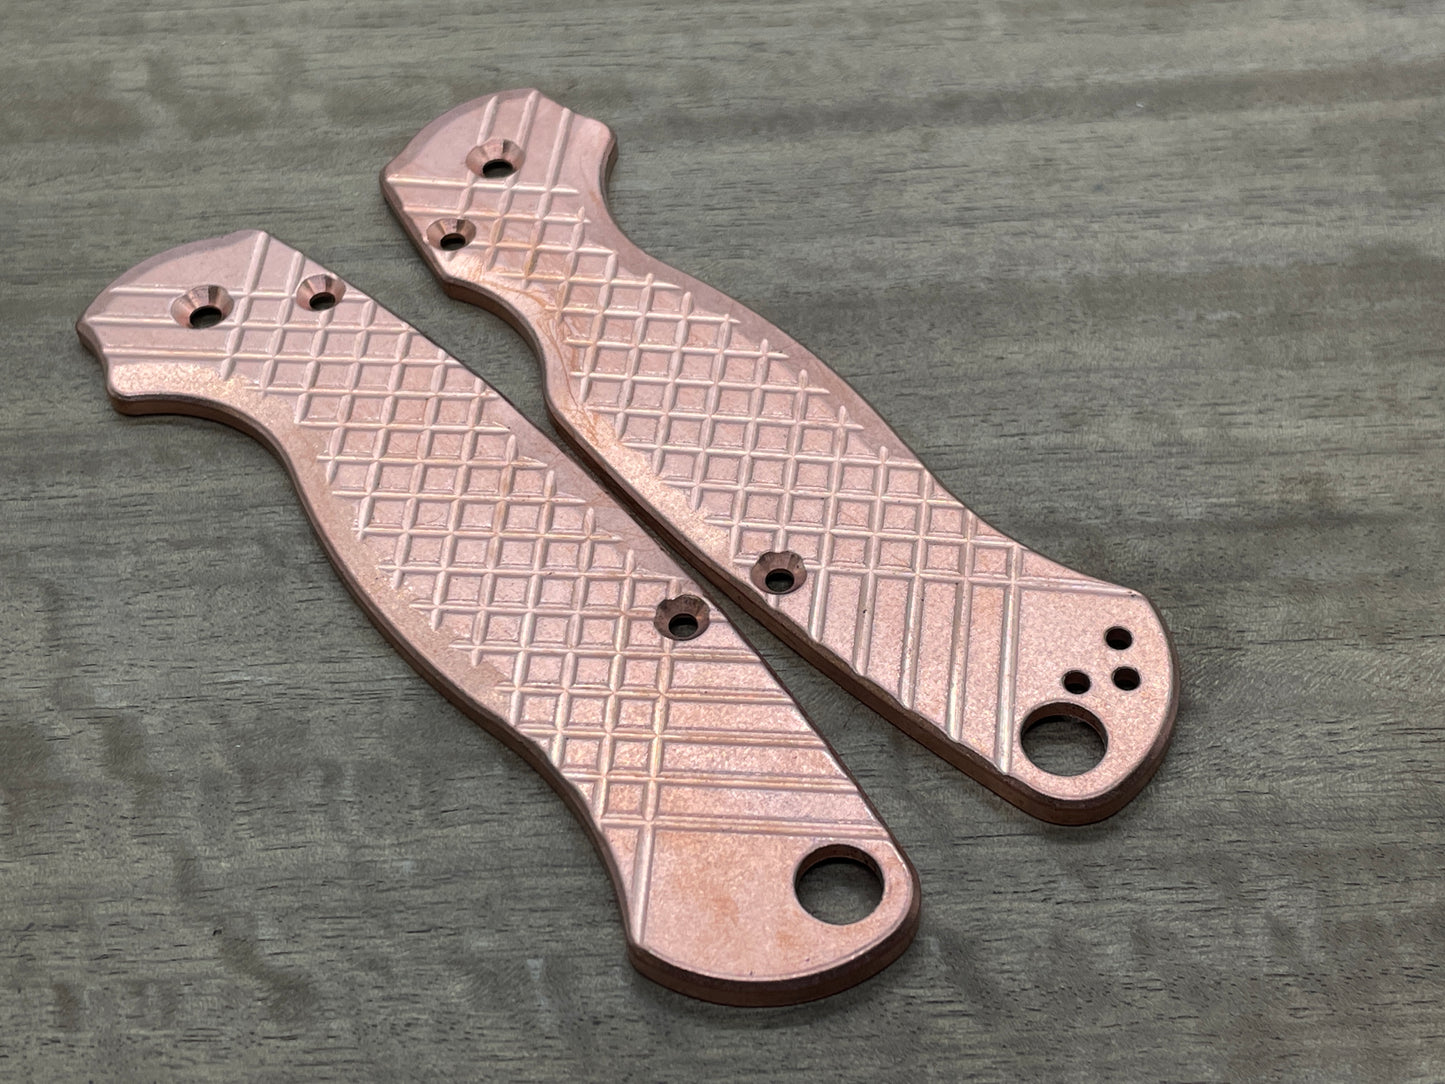 FRAG milled TUMBLED Copper Scales for Spyderco Paramilitary 2 PM2